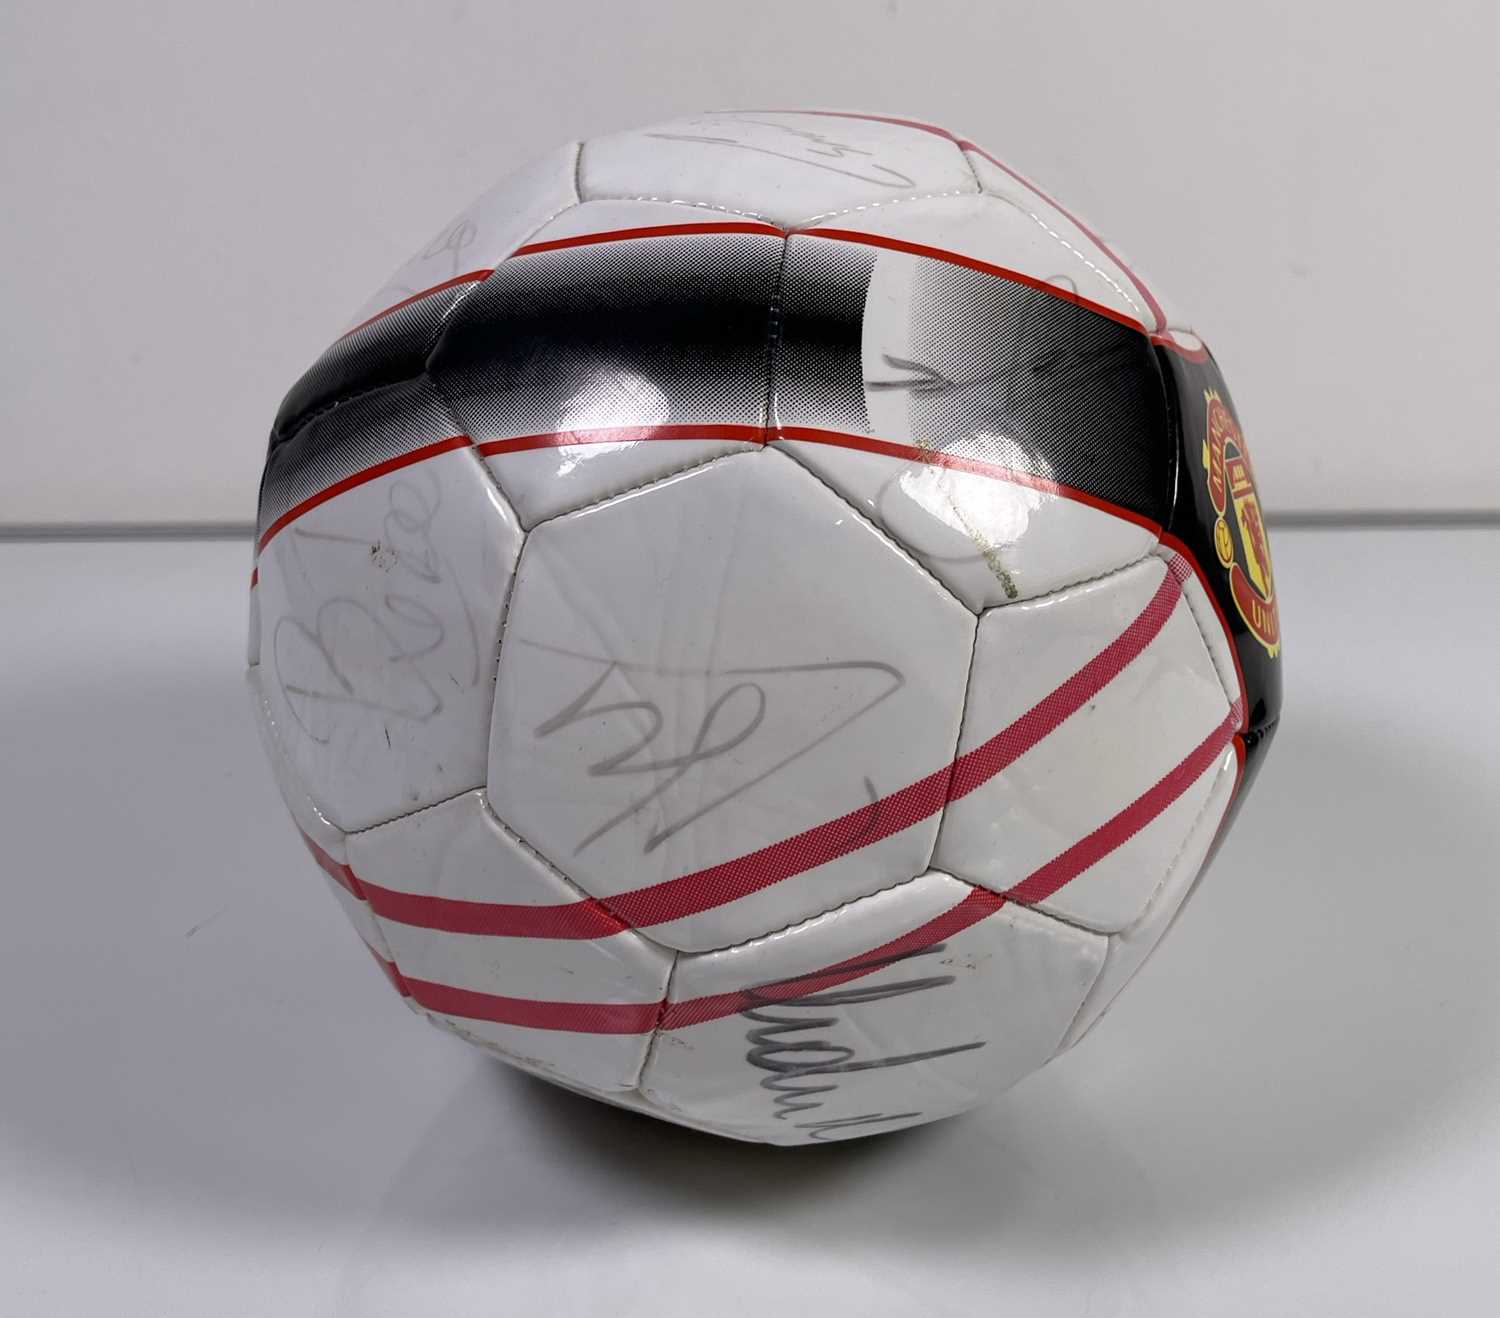 SIGNED MANCHESTER UNITED FOOTBALL. - Image 4 of 6